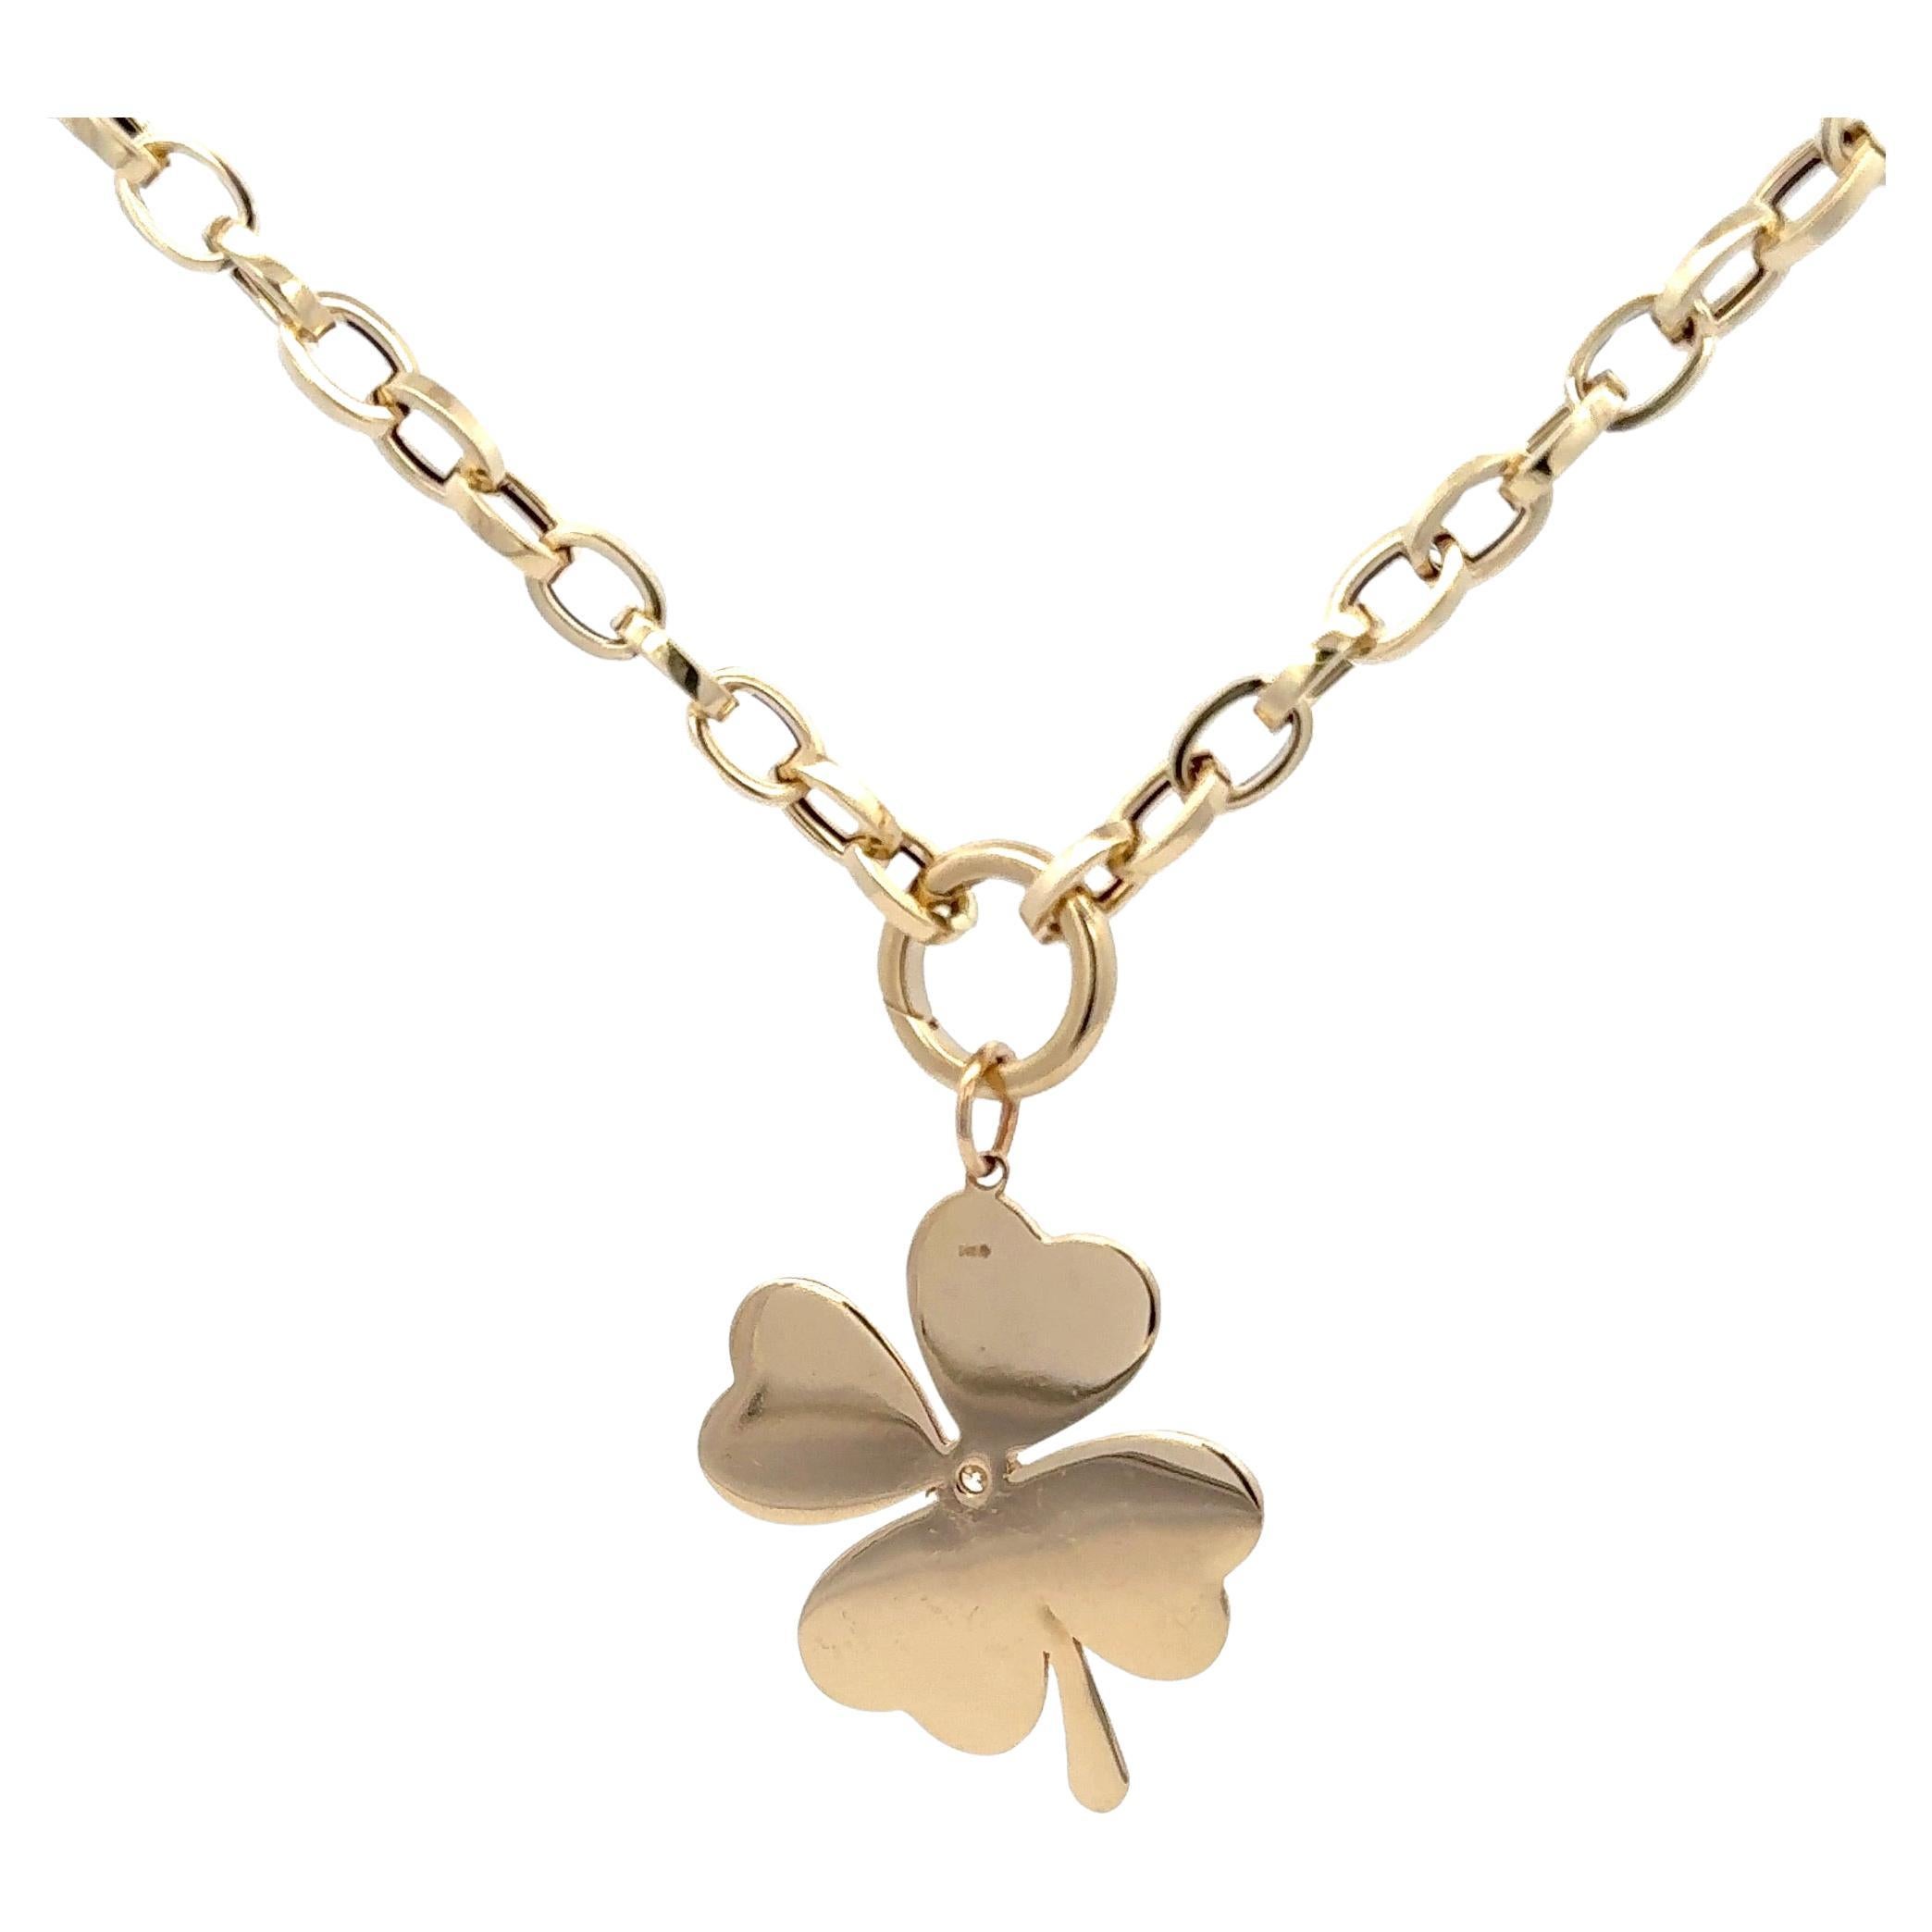 Italian four leaf clover pendant featuring one center diamond weighing .05 carats on a 18